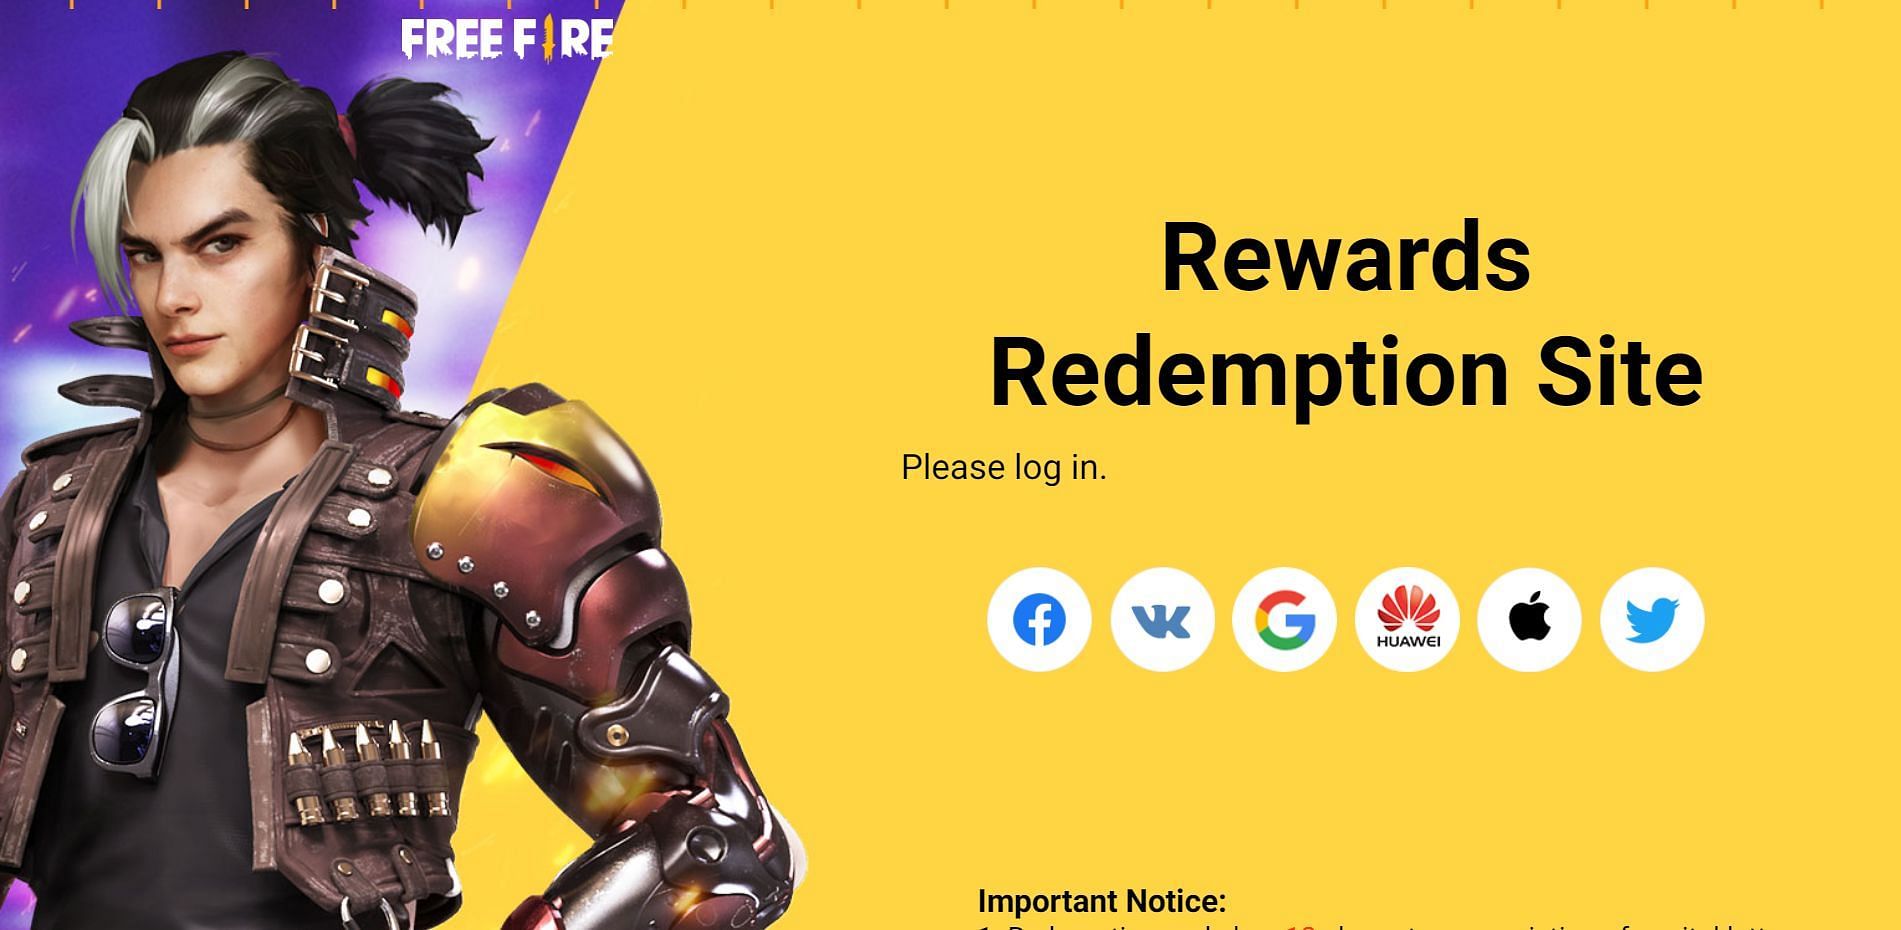 After being on the Rewards Redemption Site, players must sign in via any one method (Image via Garena)